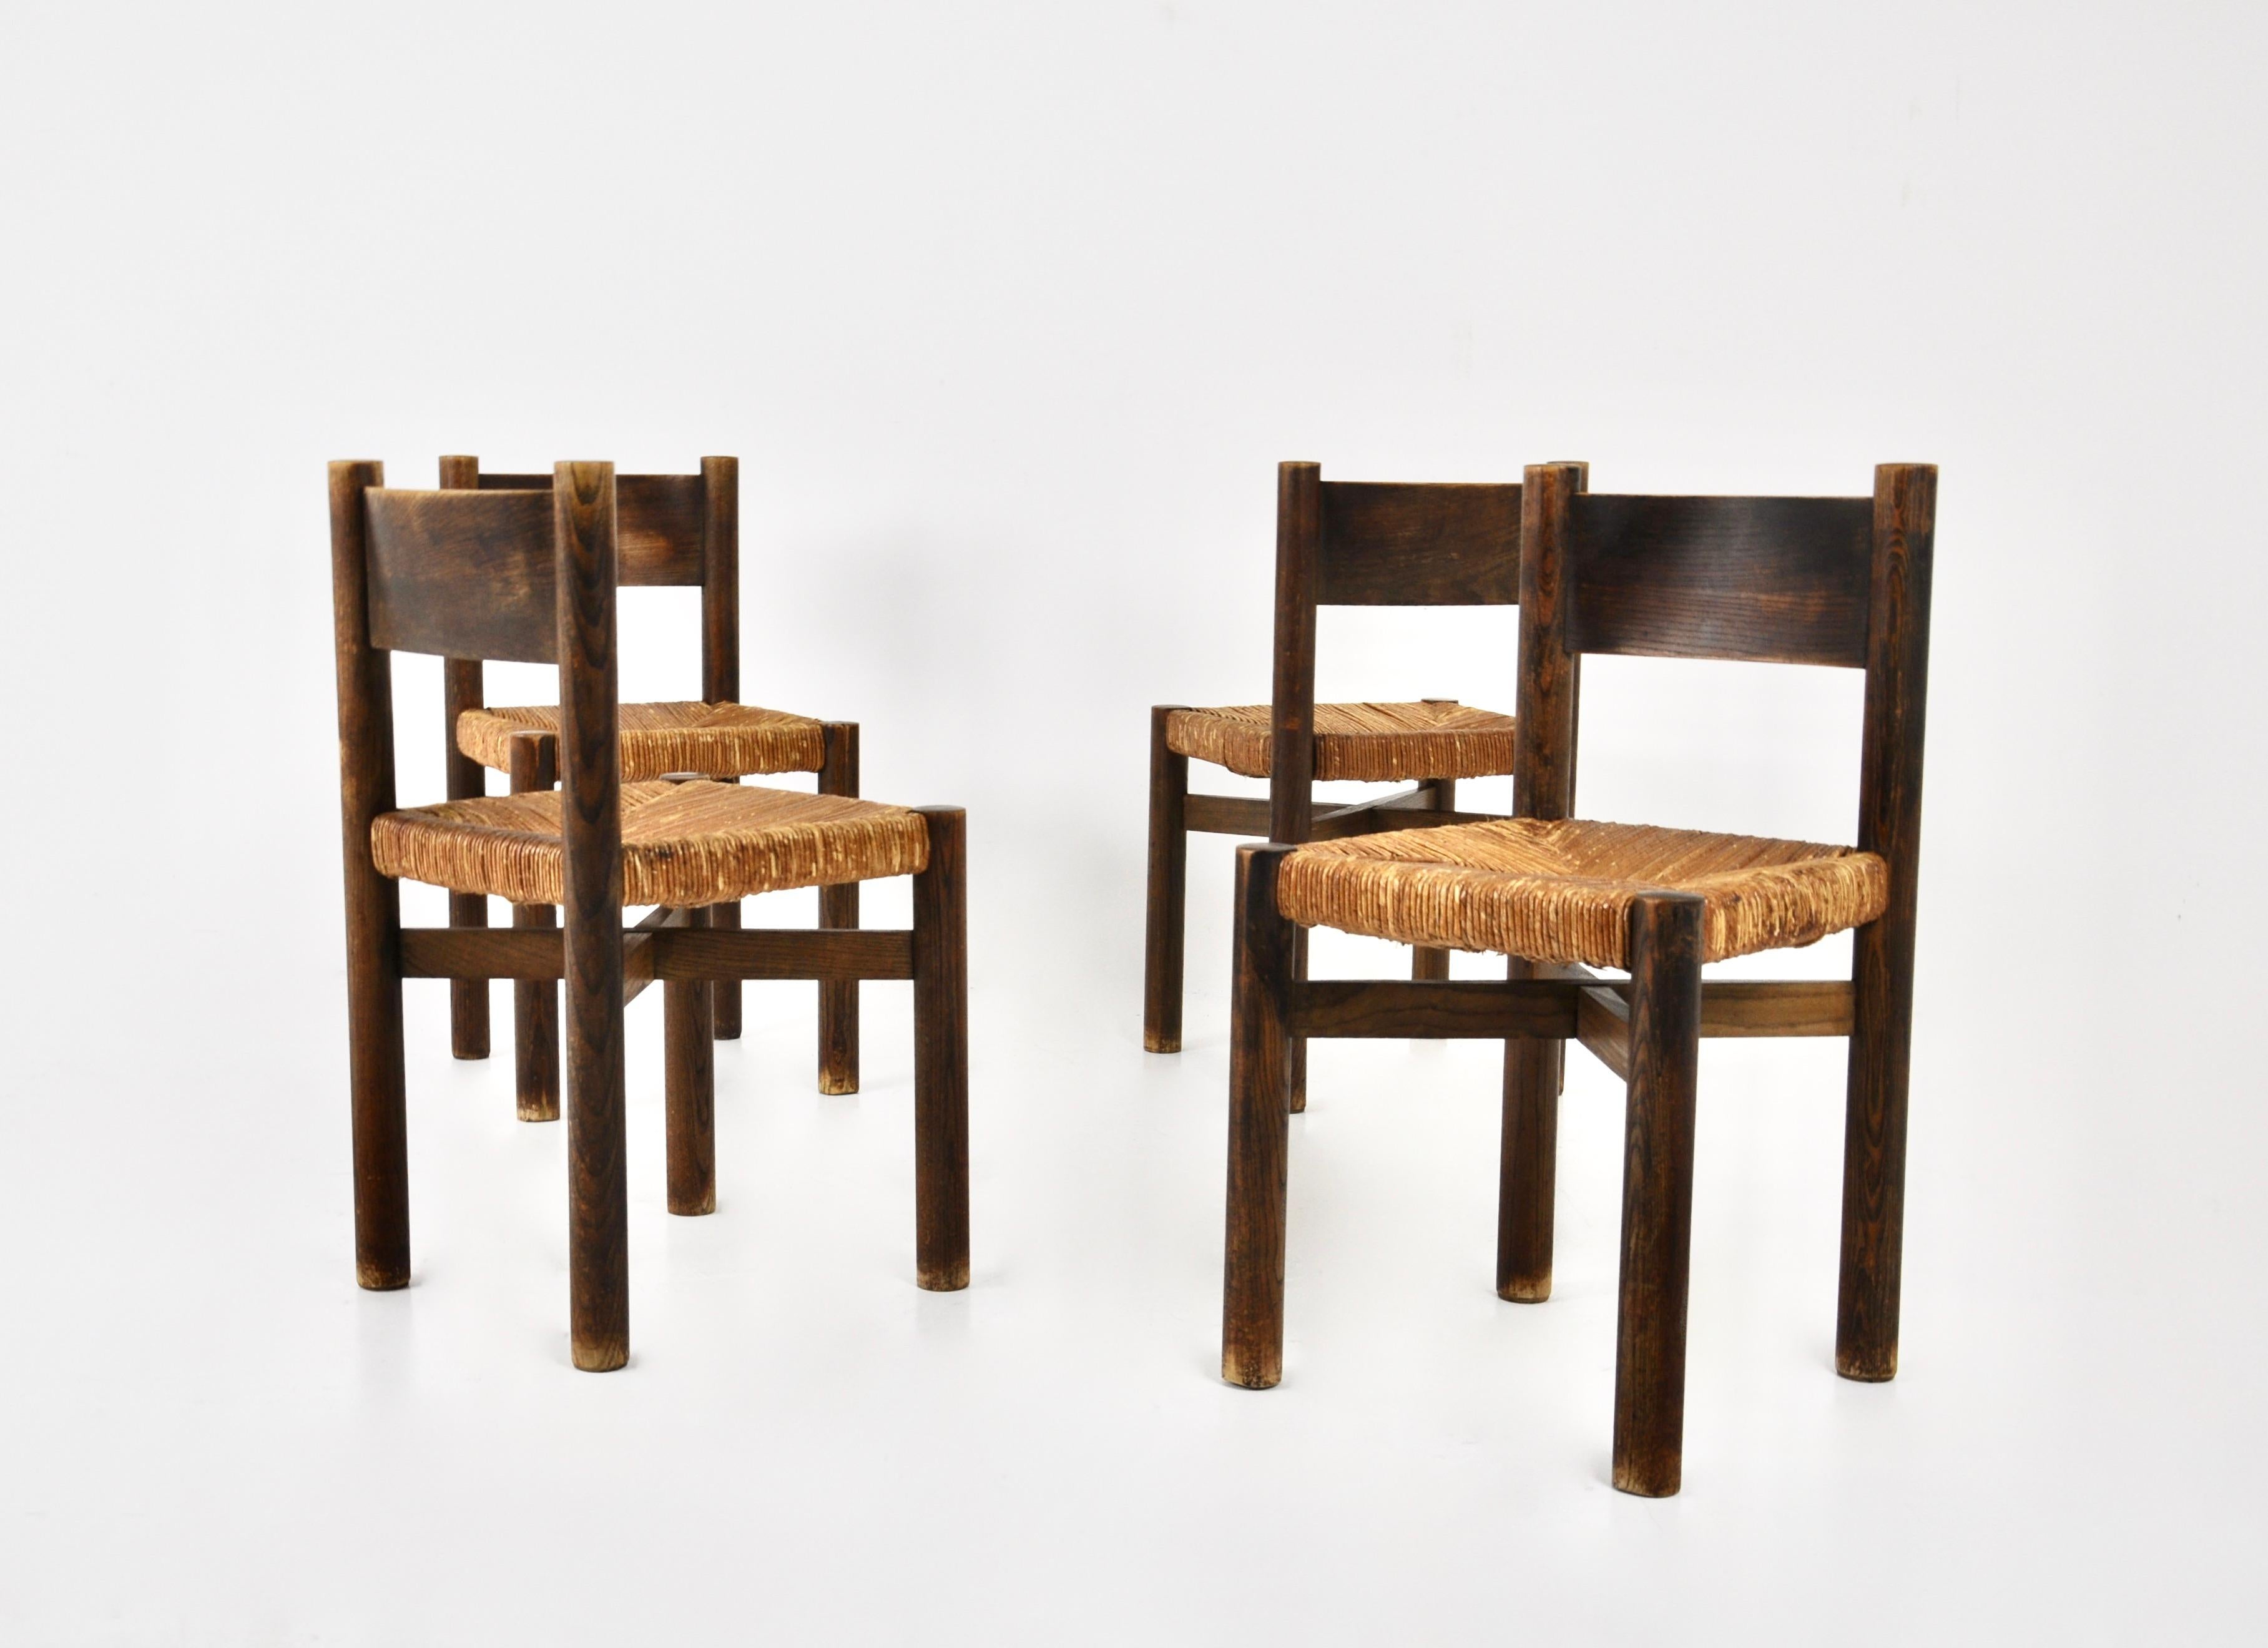 Meribel chairs by Charlotte Perriand for Steph Simon, 1950s, set of 4 For Sale 7